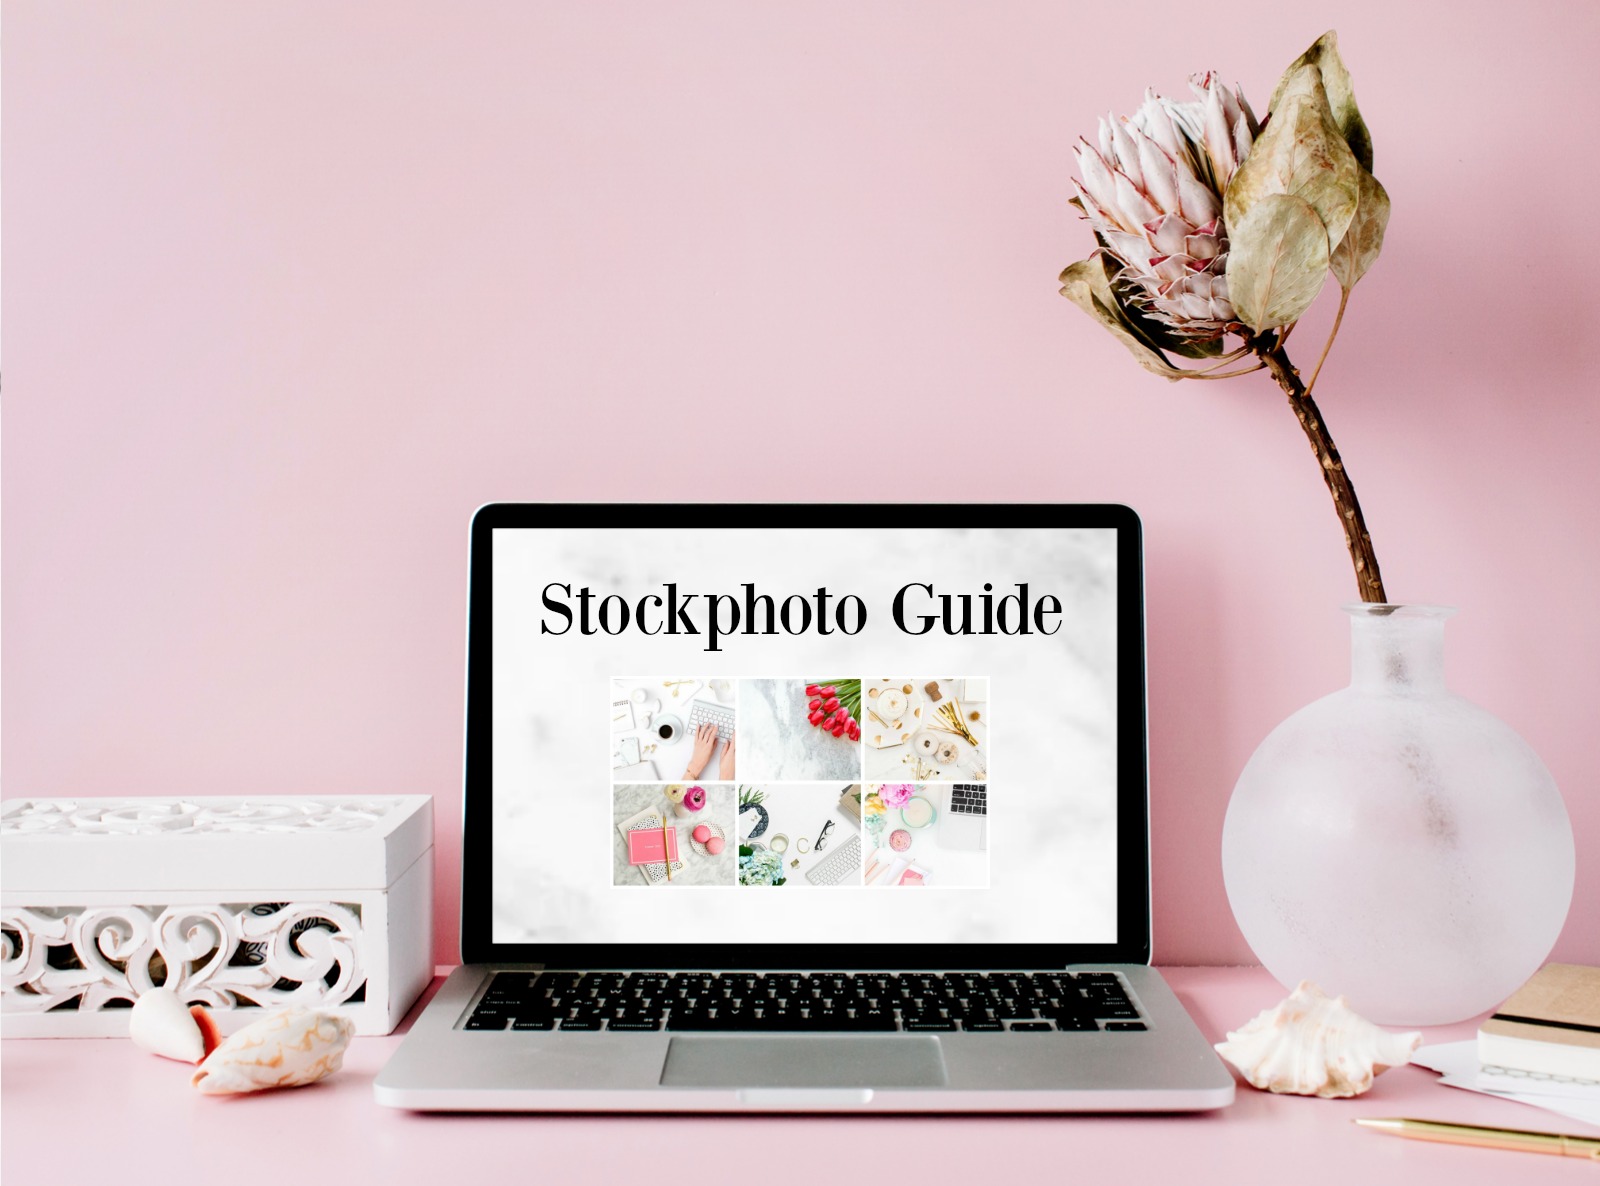 stockphoto guide